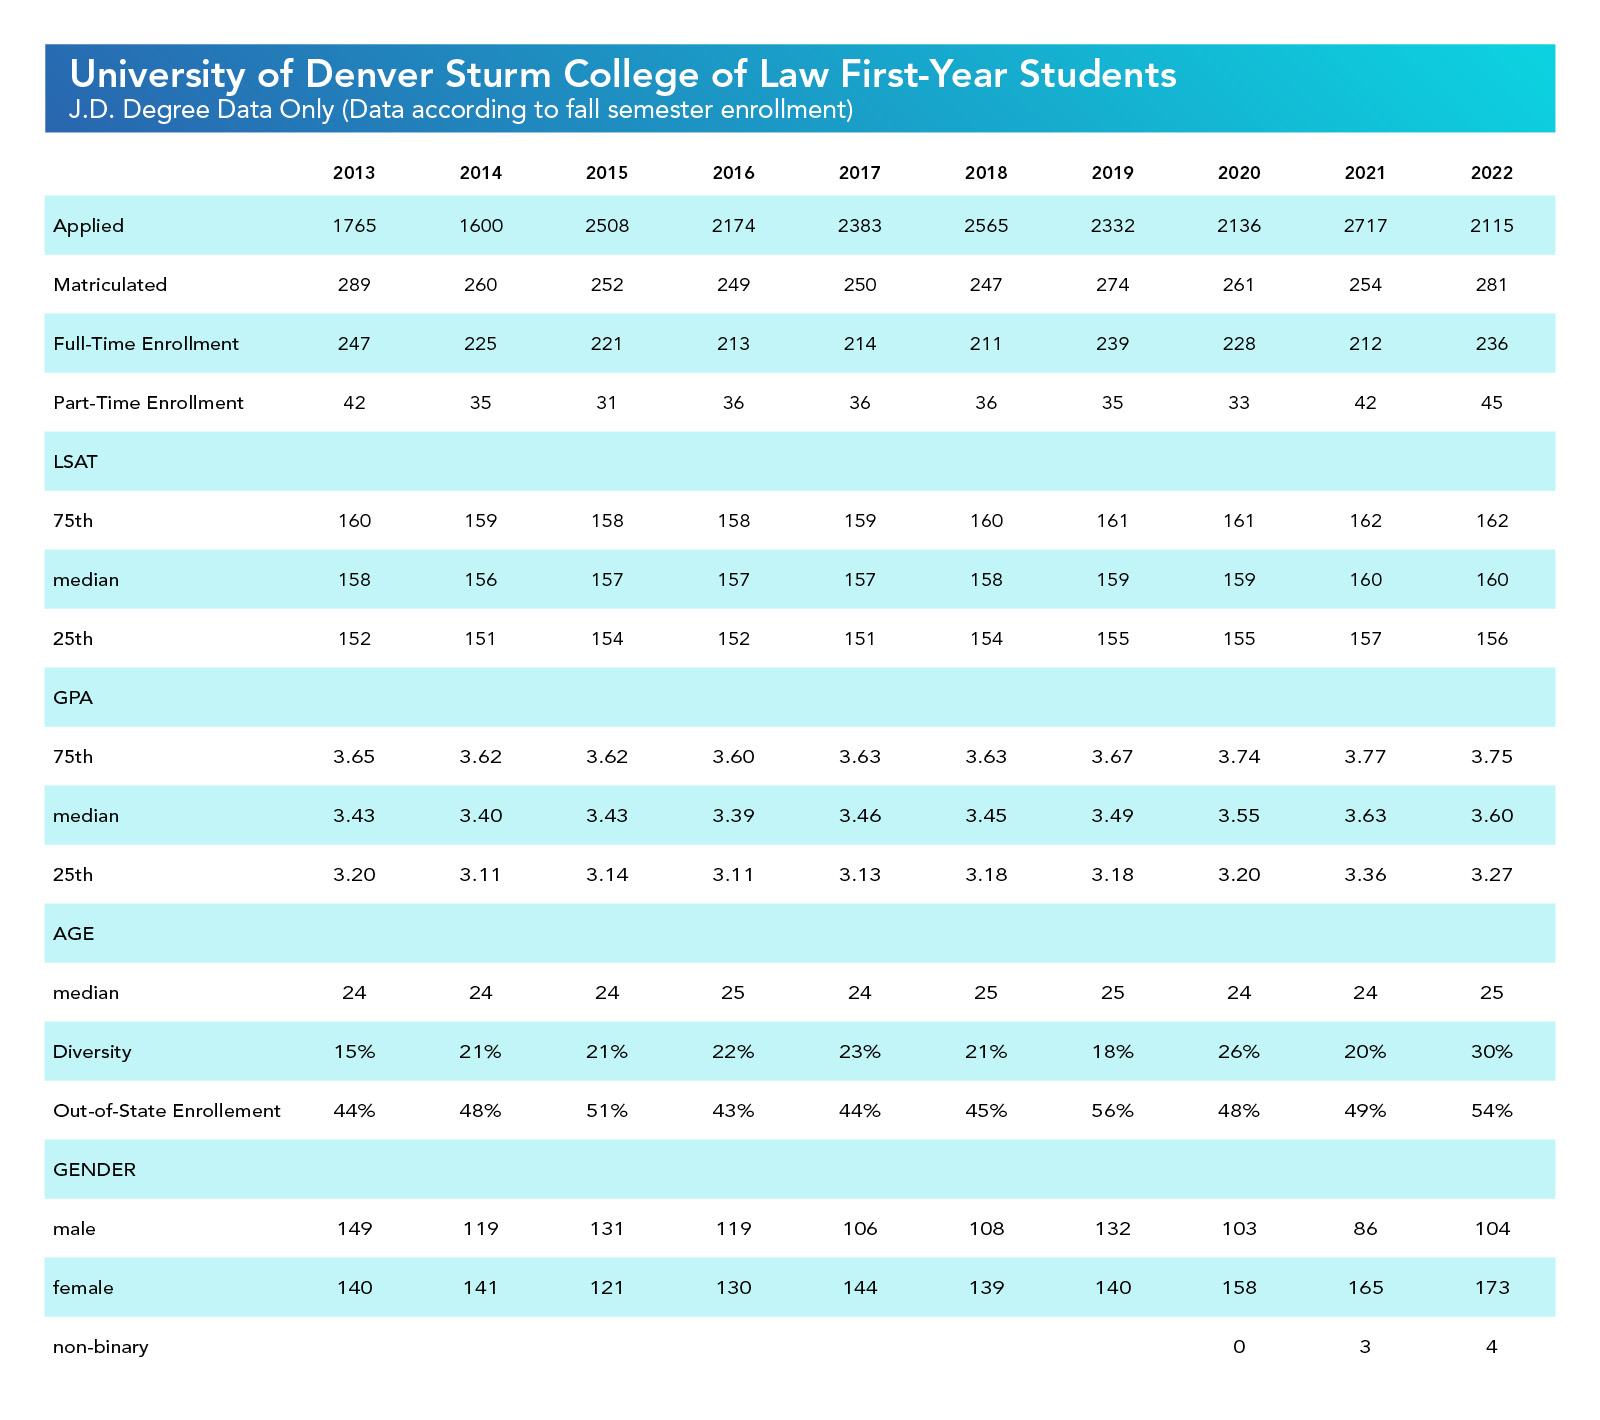 University of Denver Sturm College of Law first-year students J.D. degree data only (data according to fall semester enrollment) At the University of Denver Sturm College of Law in 2022 for first-year students during the fall, 2,115 applied to the school, 281 were matriculated, 236 had full-time enrollment, 45 were part-time, LSAT scores for the 75th percentile were 162 while the median was 160 and the 25th percentile was 156. For 2022 first-year students, GPA was 3.75 for the 75th percentile, 3.60 for the median and 3.27 for the 25th percentile, while the median age of a student was 25 and 30% of the class was diverse with 54% of the class being from out of the state, and 104 were male, 173 were female and four were non-binary. For the 2021 class of first-year students in the fall, 2,717 applied, 254 were matriculated, 212 were full-time and 42 were part-time. Their LSAT score for the 75th percentile was 162 while the median score was 160 and the 25th percentile was 157. The 75th percentile GPA was 3.77 while the median was 3.63 and the 25th percentile was 3.36. Median age was 24 while the class was 20% diverse, there was 49% out-of-state enrollment, 86 were male, 165 were female and three were non-binary. For the 2020 class of first-year students in the fall, 2,136 applied, 261 were matriculated, 228 had full-time enrollment, 33 had part-time enrollment, the 75th percentile LSAT was 161, the median LSAT was 159 and the 25th percentile was 155. The 75th percentile GPA was 3.74, the median was 3.55 and the 25th percentile was 3.20. The median age was 24, the class was 26% diverse and there was 48% out-of-state enrollment. There were 103 male students and 158 female. For the 2019 class of first-year students in the fall, 2,332 applied, 274 were matriculated, 239 had full-time enrollment, 35 had part-time enrollment, the 75th percentile LSAT was 161, while 159 was the median and 155 was the 25th percentile LSAT. The 75th percentile GPA was 3.67, the median was 3.49 and the 25th percentile was 3.18. The median age was 25 while the class was 18% diverse and there was 56% out-of-state enrollment. There were 132 male and 140 female students. For the 2018 class of first-year students in the fall, there were 2,565 applications, 247 matriculated, 211 who had full-time enrollment and 36 that were part-time. The 75th percentile LSAT was 160, while the median was 158 and the 25th percentile was 154. The 75th percentile GPA was 3.63, the median was 3.45 and the 25th percentile was 3.18. The median age was 25 while 21% of the field was diverse and 45% of the students were from out of state. There were 108 male and 139 female students. For the 2017 class of first-year students in the fall, 2,383 applied, 250 were matriculated, 214 had full-time enrollment and 36 were part-time. The 75th percentile LSAT was 159, while the median was 157 and the 25th percentile was 151. The 75th percentile GPA was 3.63 while the median was 3.46 and the 25th percentile was 3.13. The median age was 24, the class was 23% diverse and 44% were from out-of-state. 106 students were male and 144 were female. For the 2016 class of first-year students in the fall, 2,174 applied, 249 were matriculated, 213 were full-time and 36 were part-time. The 75th percentile LSAT was 158, the median was 157 and the 25th percentile was 152. The 75th percentile GPA was 3.60, the median was 3.39 and the 25th percentile was 3.11. The median age was 25, 22% were diverse, 44% were from out-of-state, 119 were male and 130 were female. For the 2015 class of first-year students in the fall, 2,508 applied, 252 were matriculated, 221 had full-time enrollment and 31 were part-time. The 75th percentile LSAT was 158, the median was 157 and the 25th percentile was 154. The 75th percentile GPA was 3.62, the median was 3.43 and the 25th percentile was 3.14. The median age was 24, 21% of the class was diverse, 51% were from out of state, 131 were male and 121 were female. For the 2014 class of first-year students in the fall, 1,600 applied, 260 were matriculated, 225 had full-time enrollment and 35 had part-time enrollment. The 75th percentile LSAT was 159, the median was 156 and the 25th percentile was 151. The 75th percentile GPA was 3.62, the median was 3.40 and the 25th percentile was 3.11. The median age was 24, the class was 21% diverse, 48% were from out-of-state and there were 119 male and 141 female students. For the 2013 class of first-year students in the fall, 1,765 applied, 289 were matriculated, 247 had full-time enrollment and 42 had part-time enrollment. The 75th percentile LSAT was 160, the median was 158 and the 25th percentile was 152. The 75th percentile GPA was 3.65, the median was 3.43 and the 25th percentile was 3.20. The median age was 24, 15% of the class was diverse, 44% were from out-of-state, 149 were male and 140 were female. 